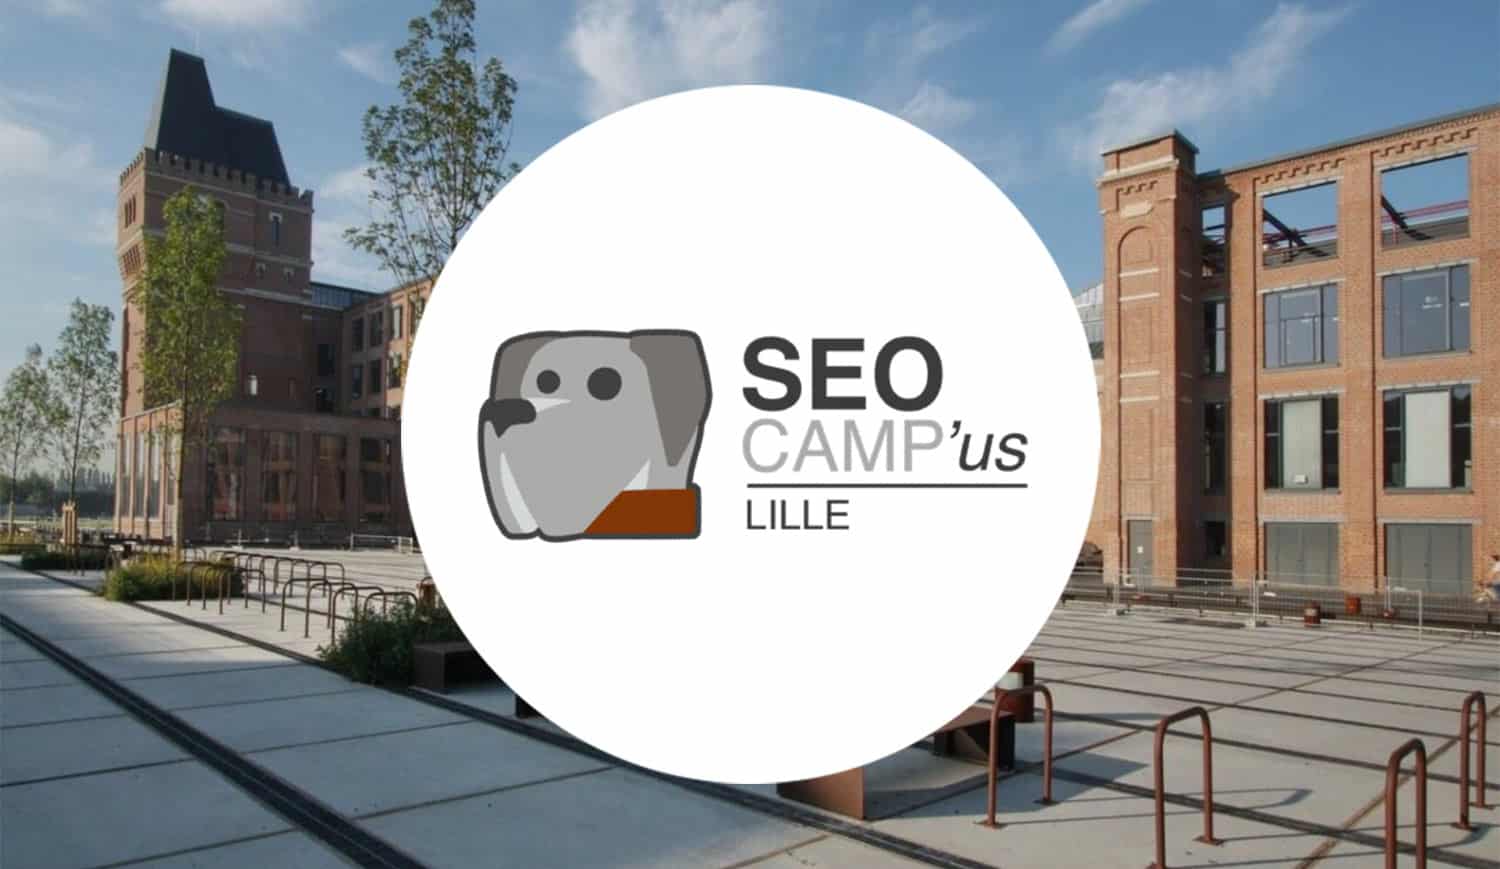 Seo Camp Day Lille 2020